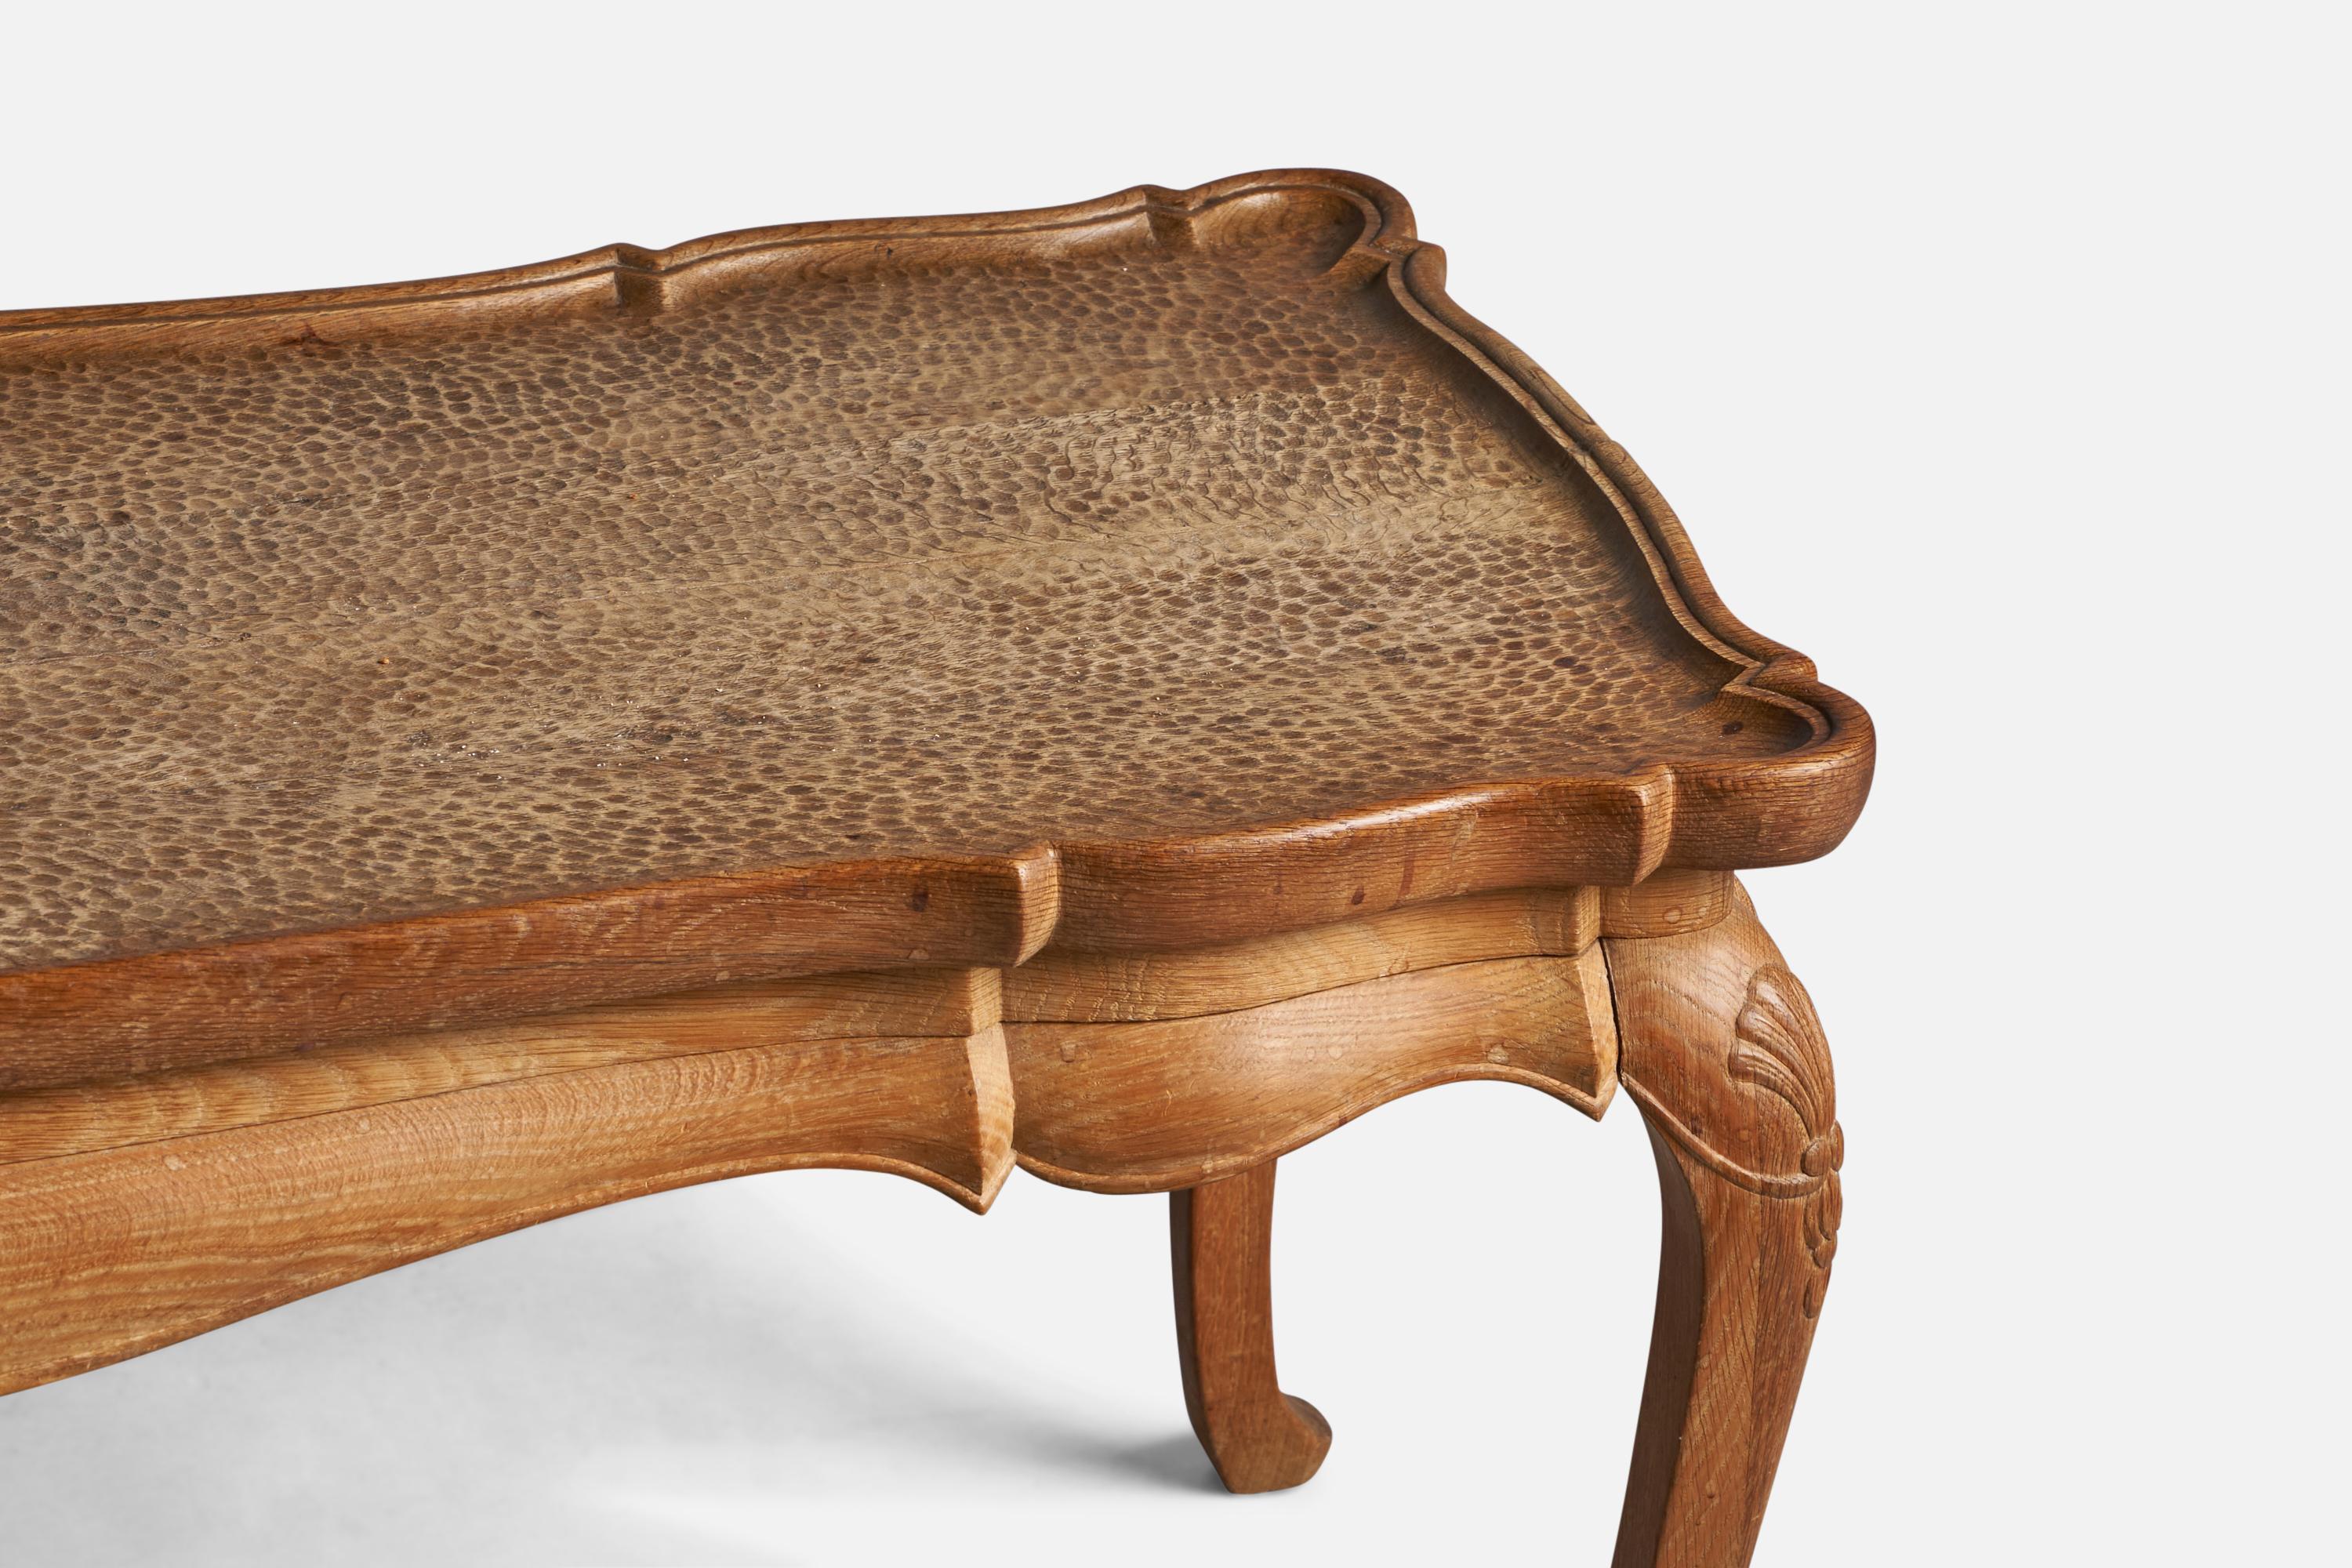 A carved solid oak coffee table, designed and produced in Denmark, 1930s.